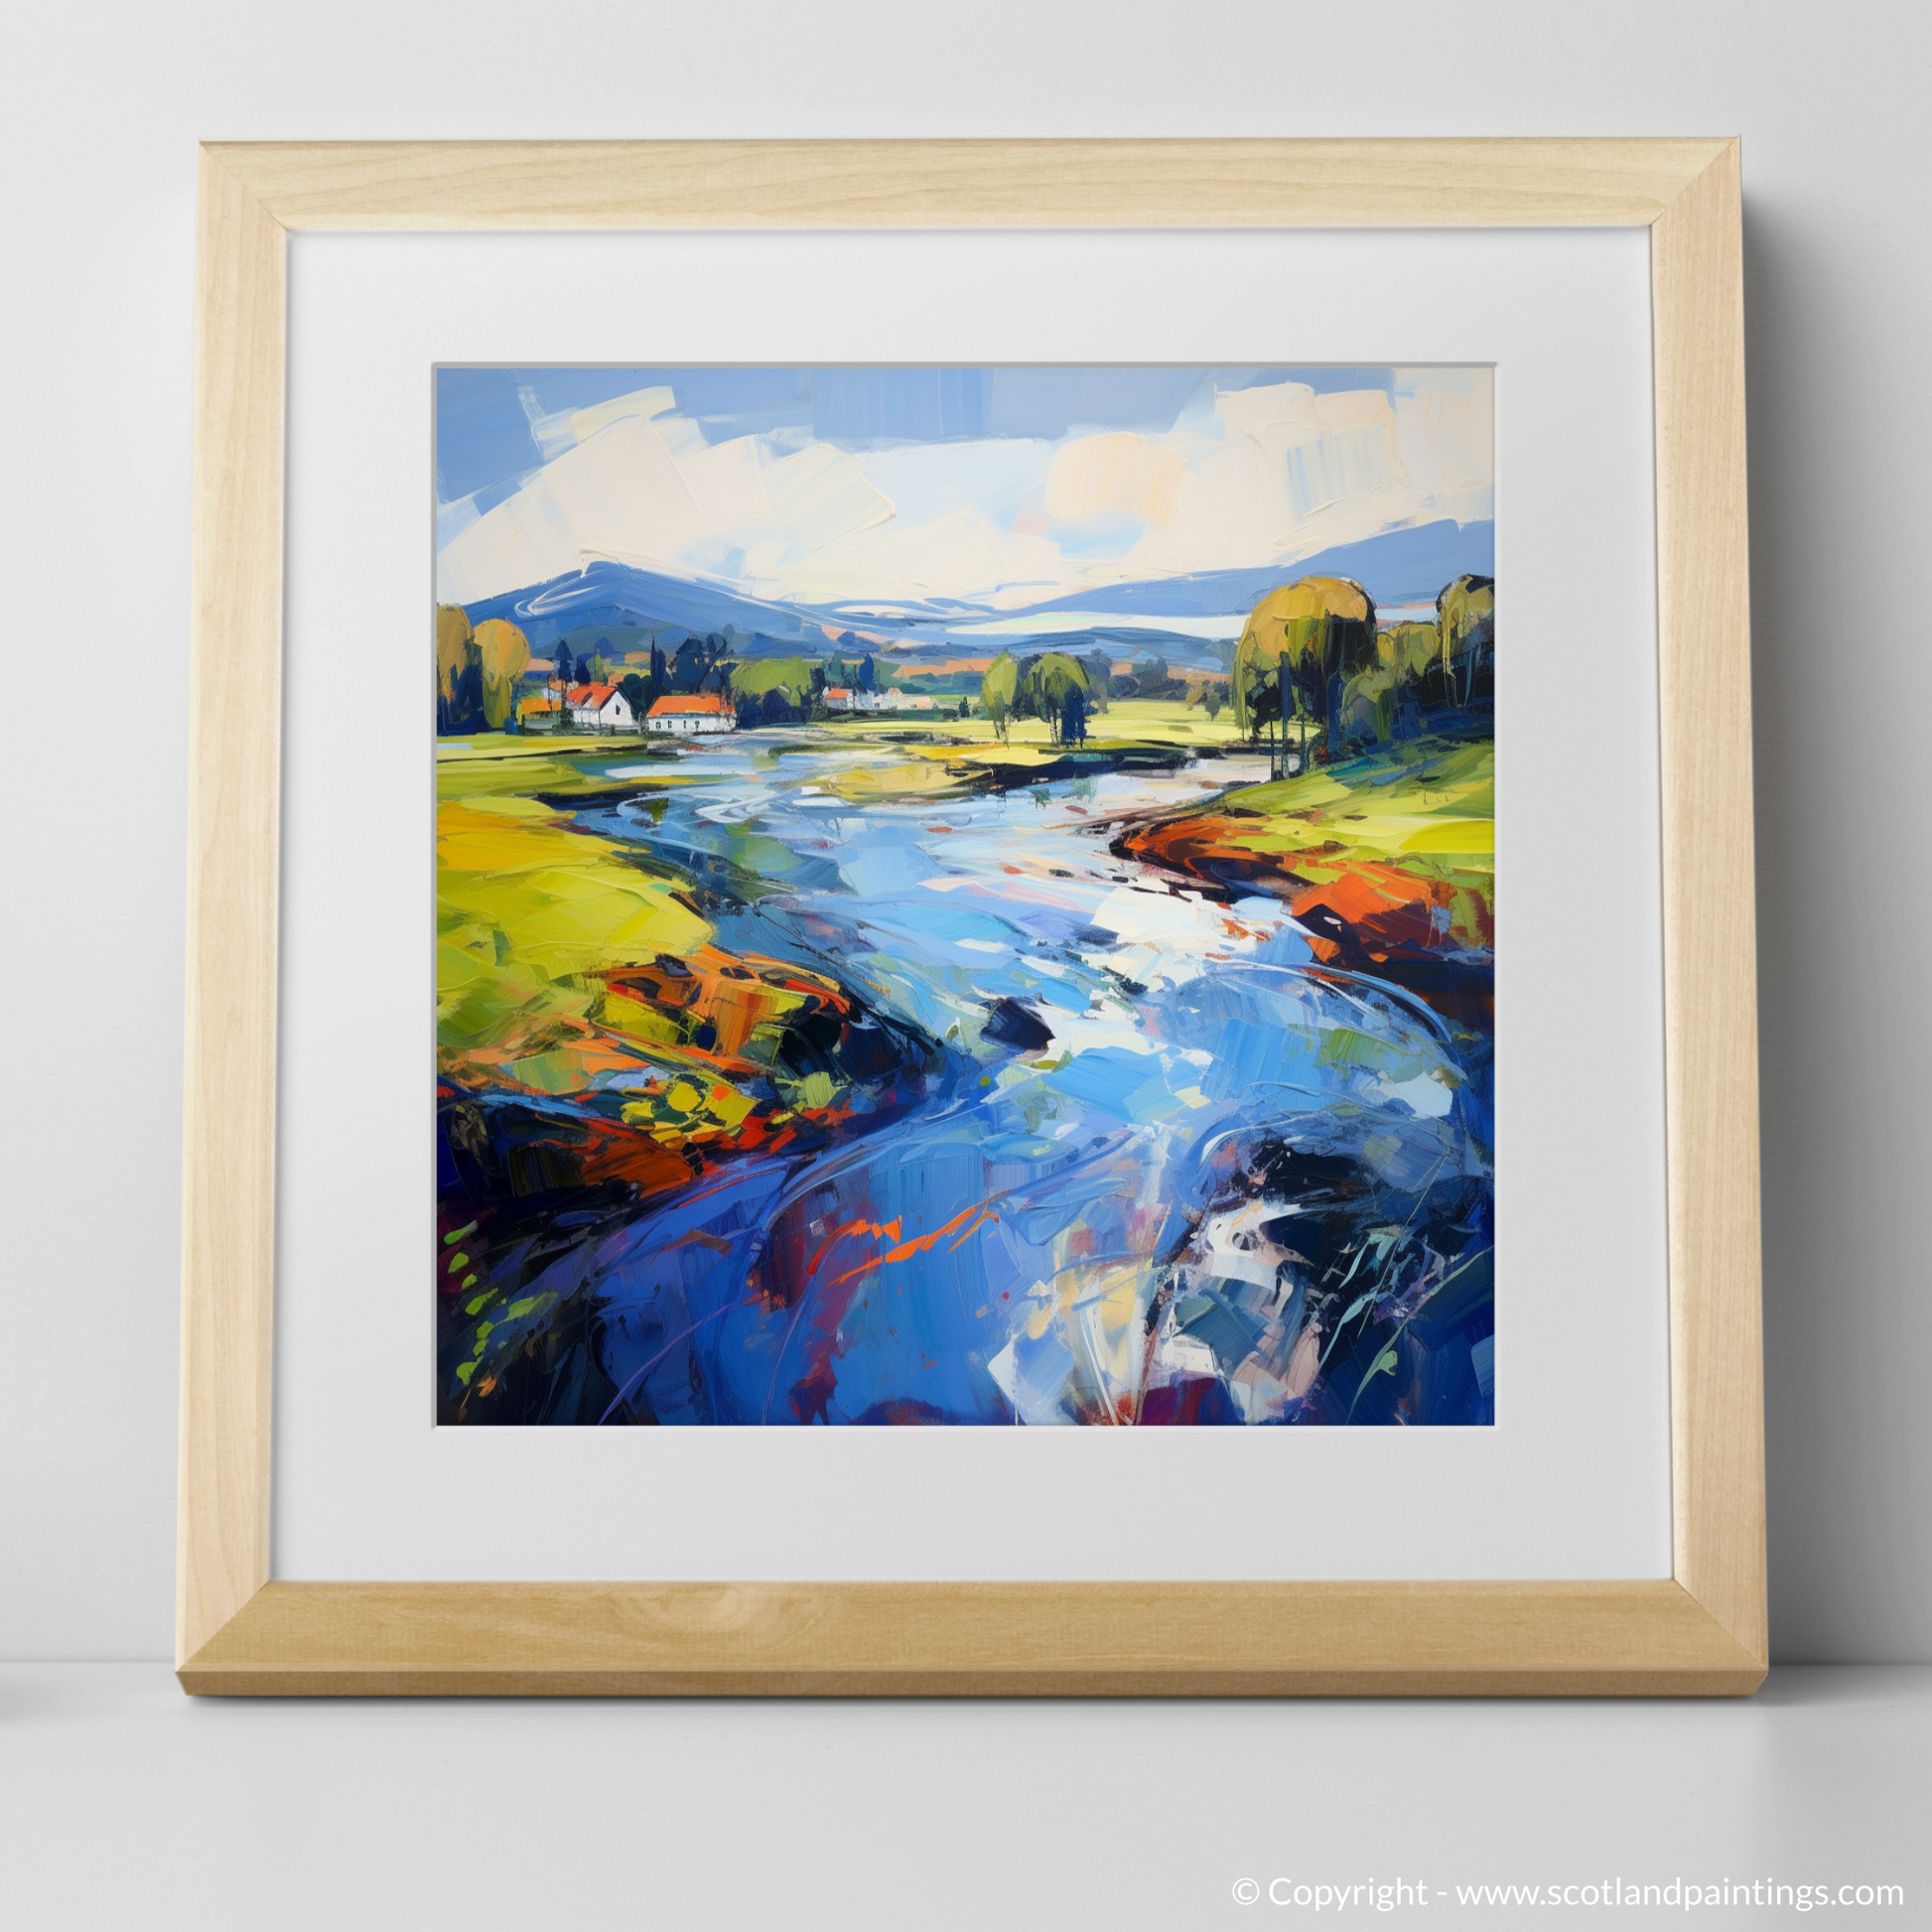 Art Print of River Leven, West Dunbartonshire with a natural frame